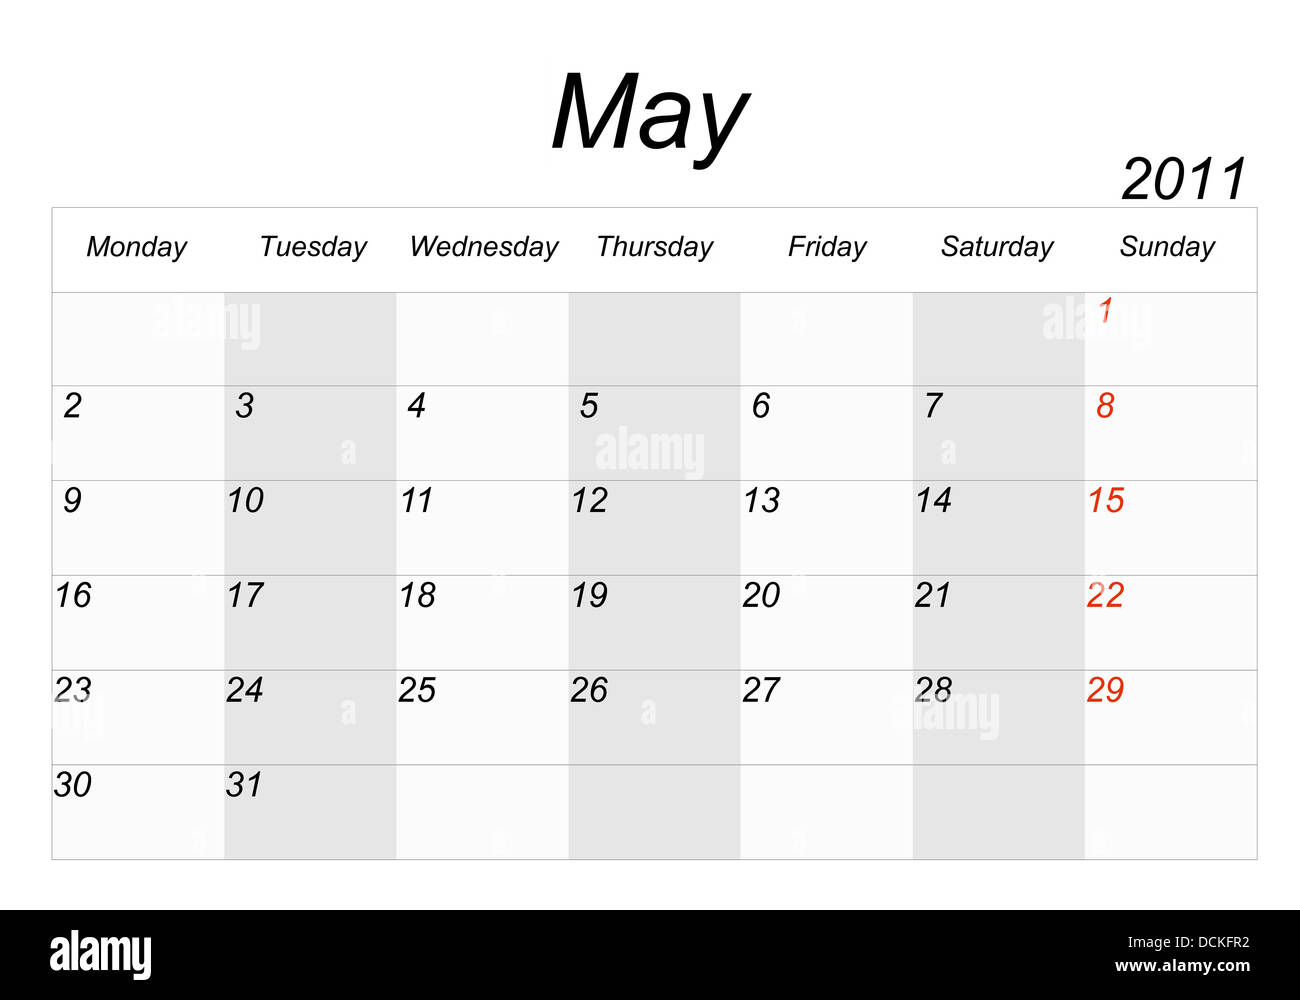 2011 Calendar The Month Of May Stock Photo Alamy